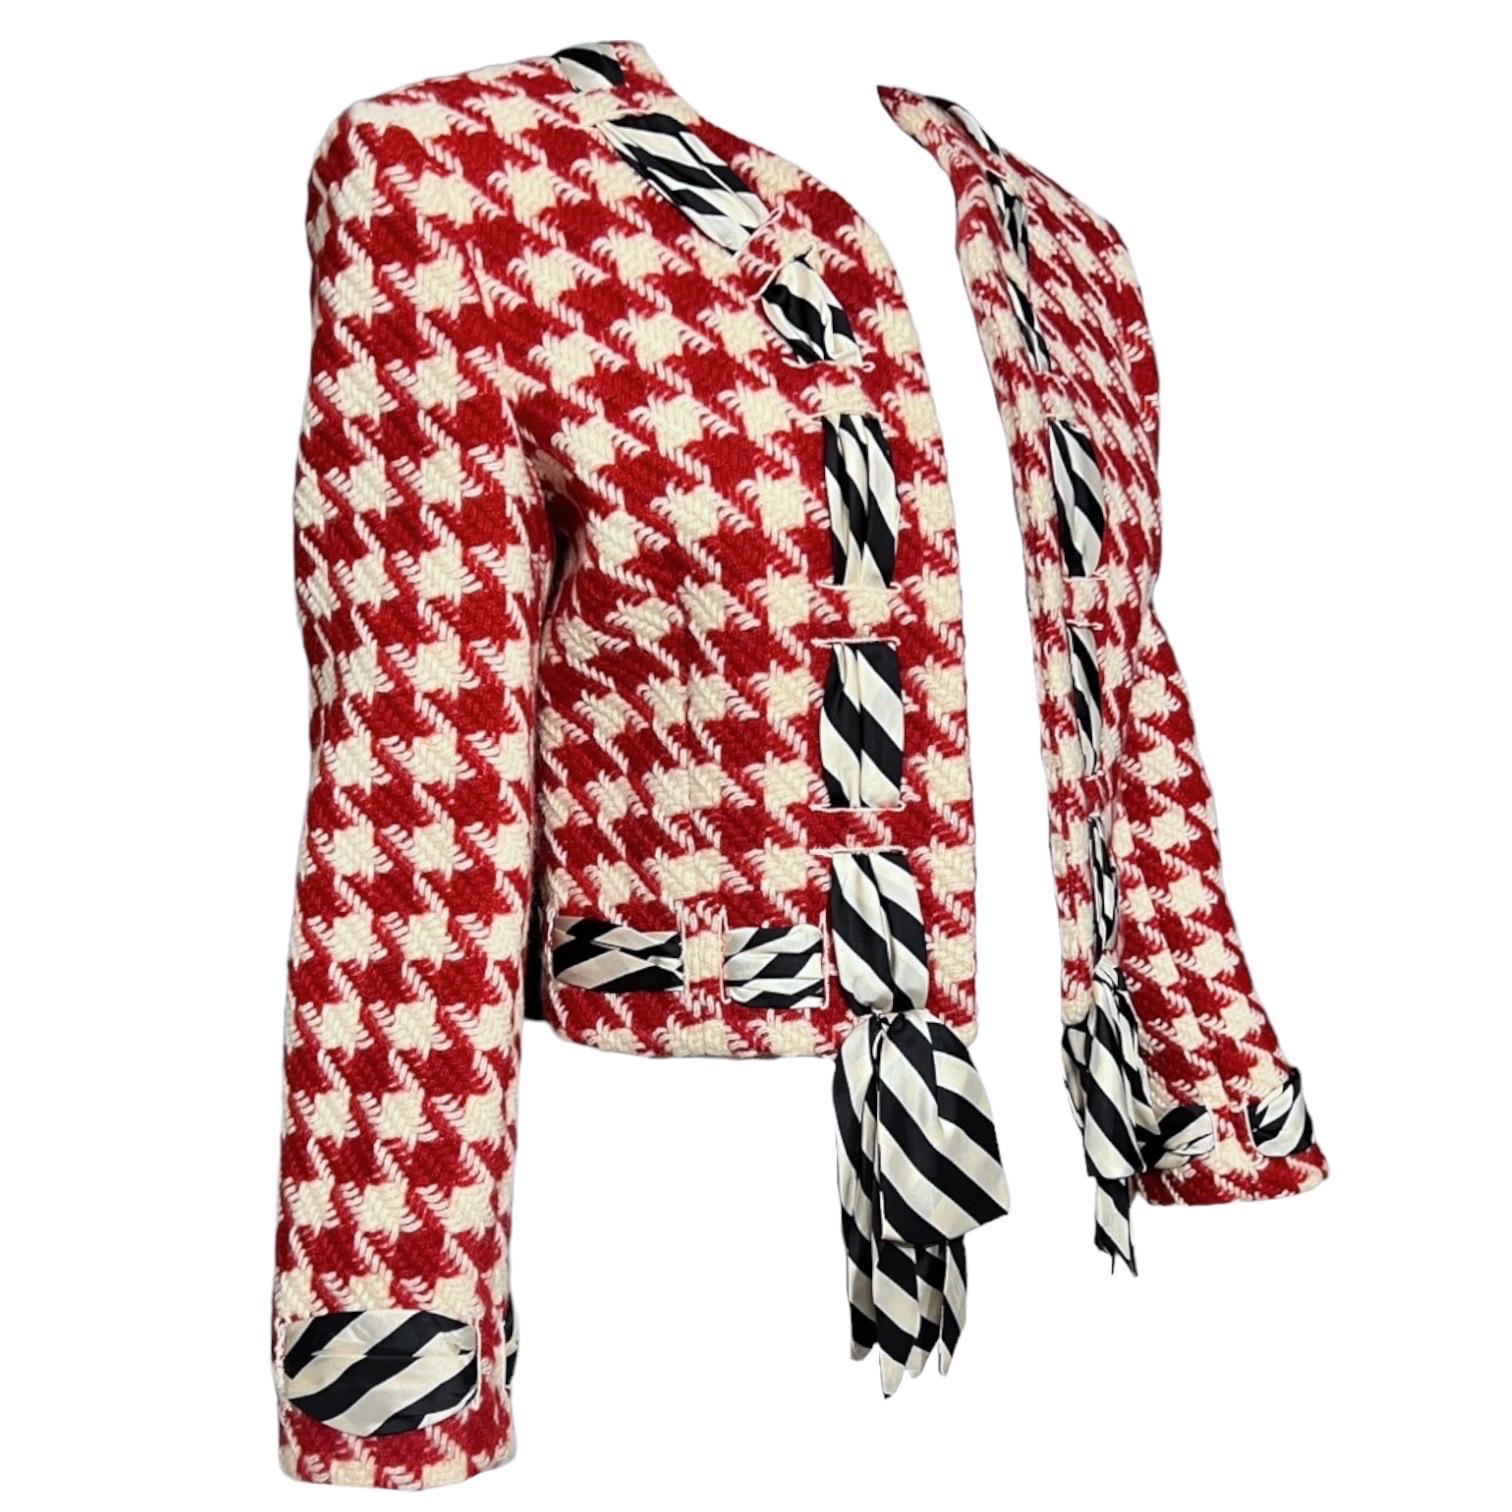 Women's Moschino Cheap and Chic Vintage Houndstooth Jacket as seen on Princess Diana